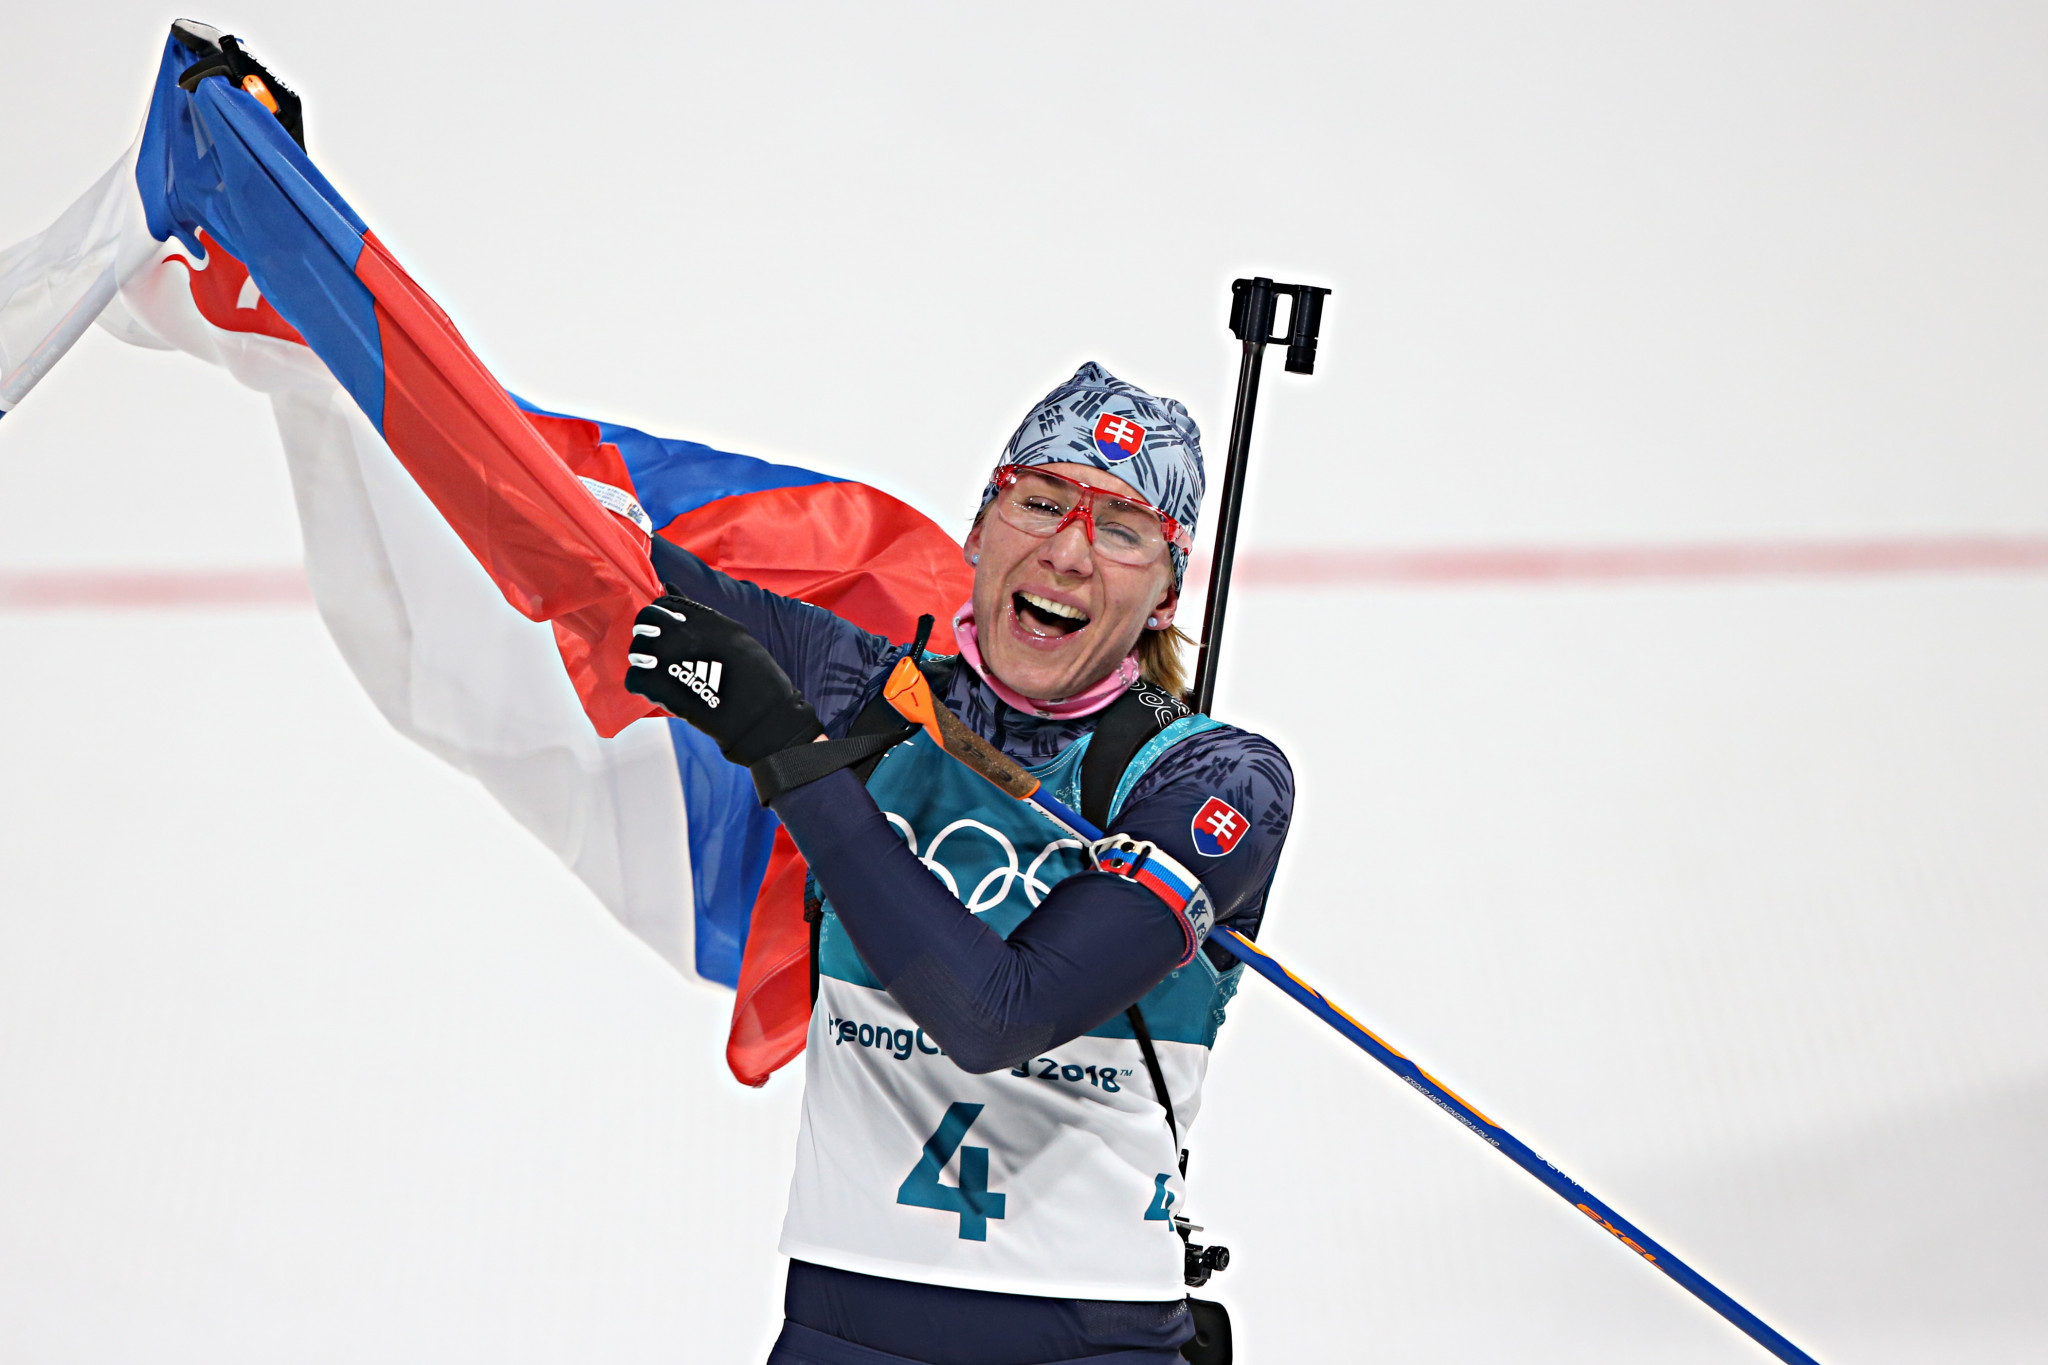 Kuzmina becomes first biathlete to win gold medals in individual events at three consecutive Olympics